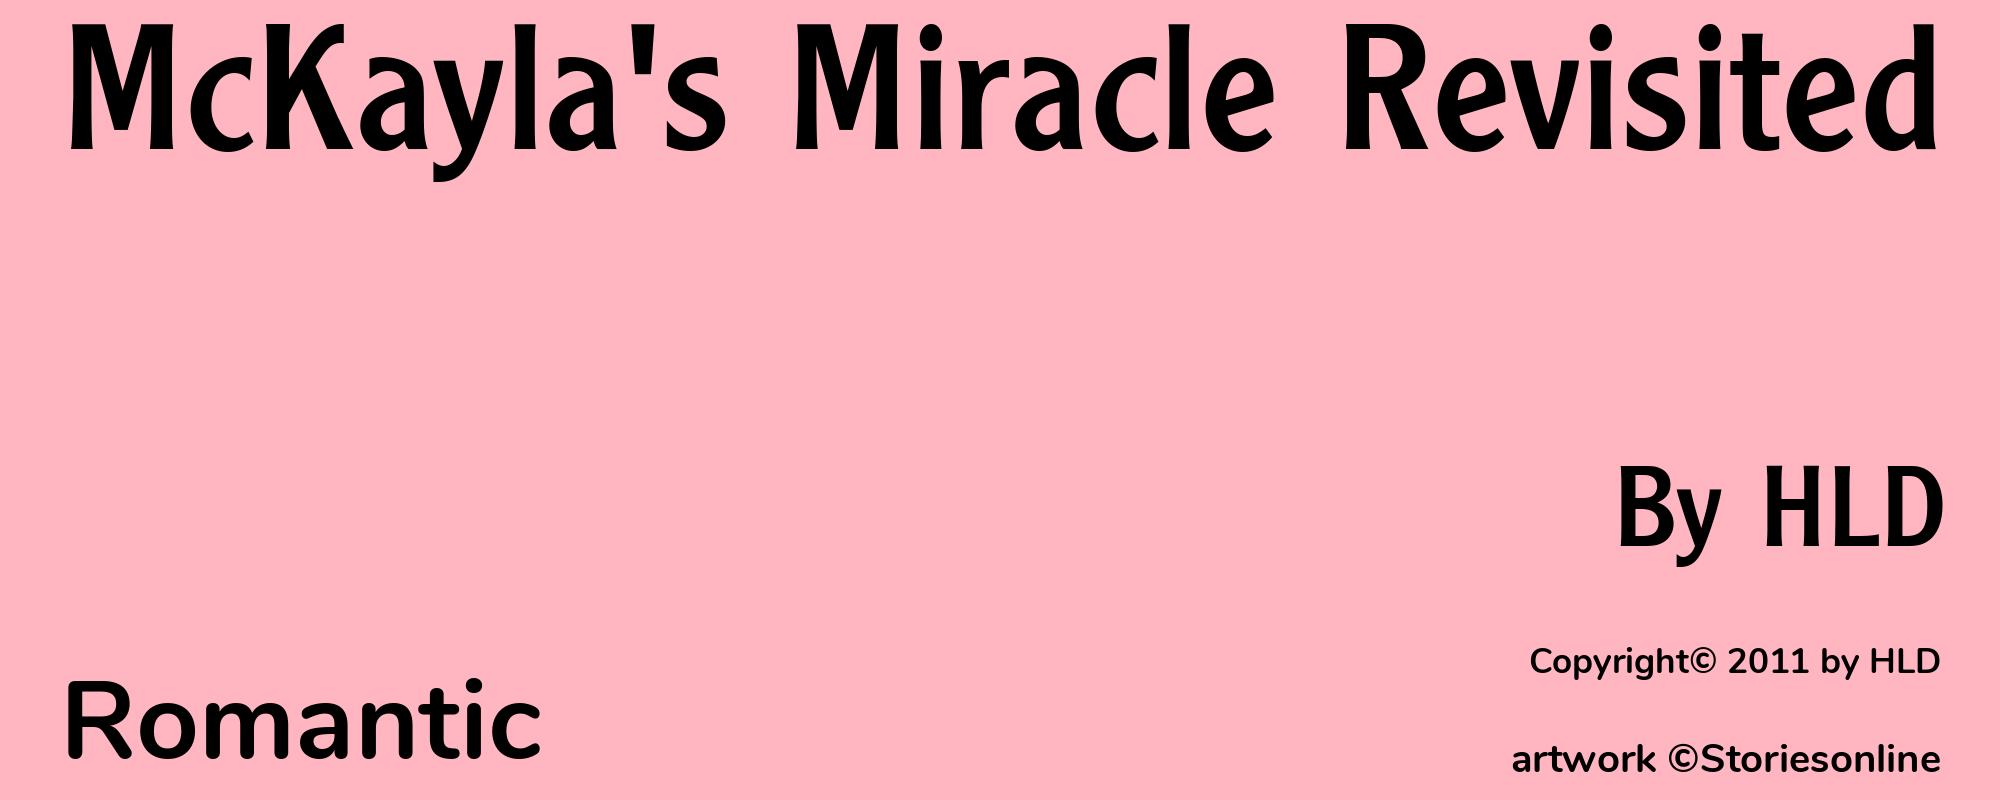 McKayla's Miracle Revisited - Cover